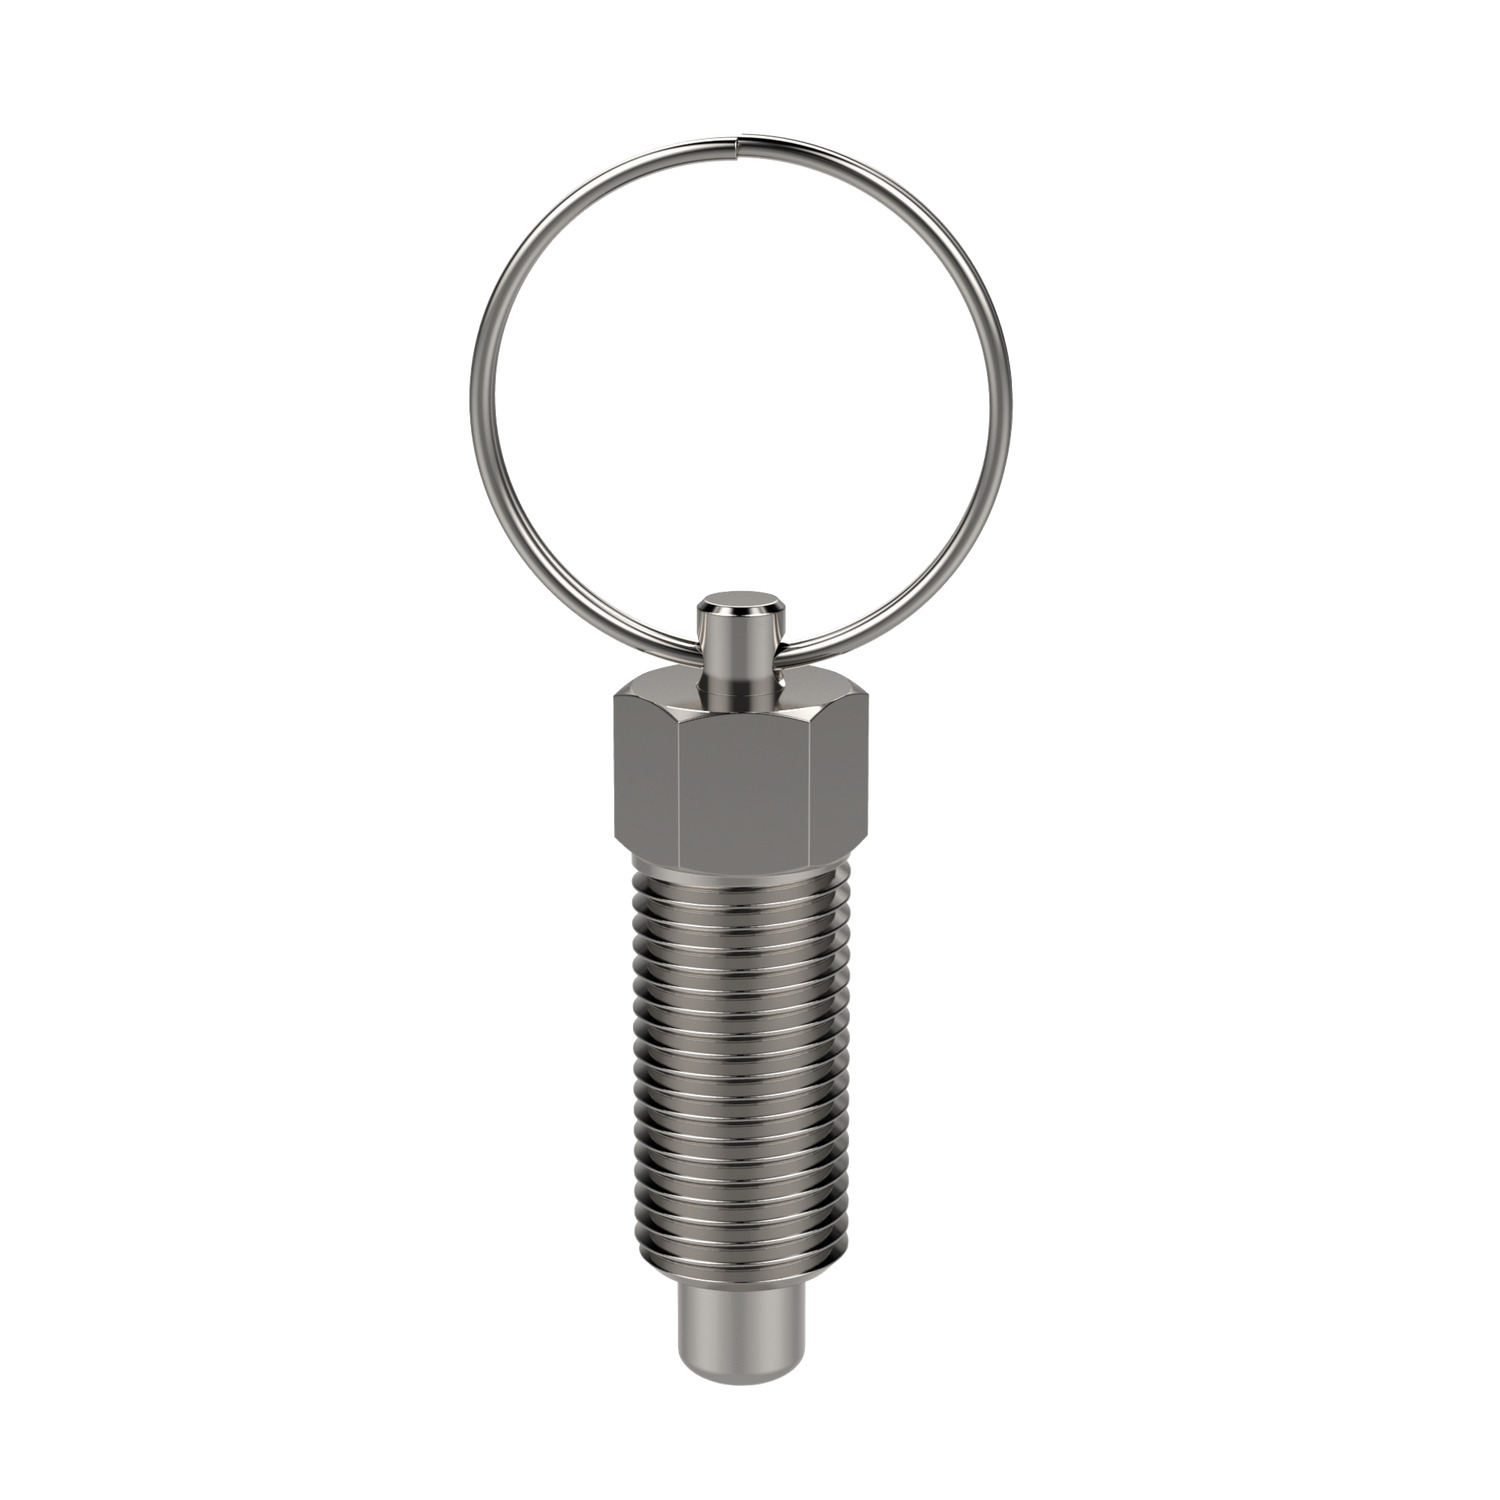 Product 32551, Index Plungers - Pull Ring non-locking - coarse thread - stainless steel / 